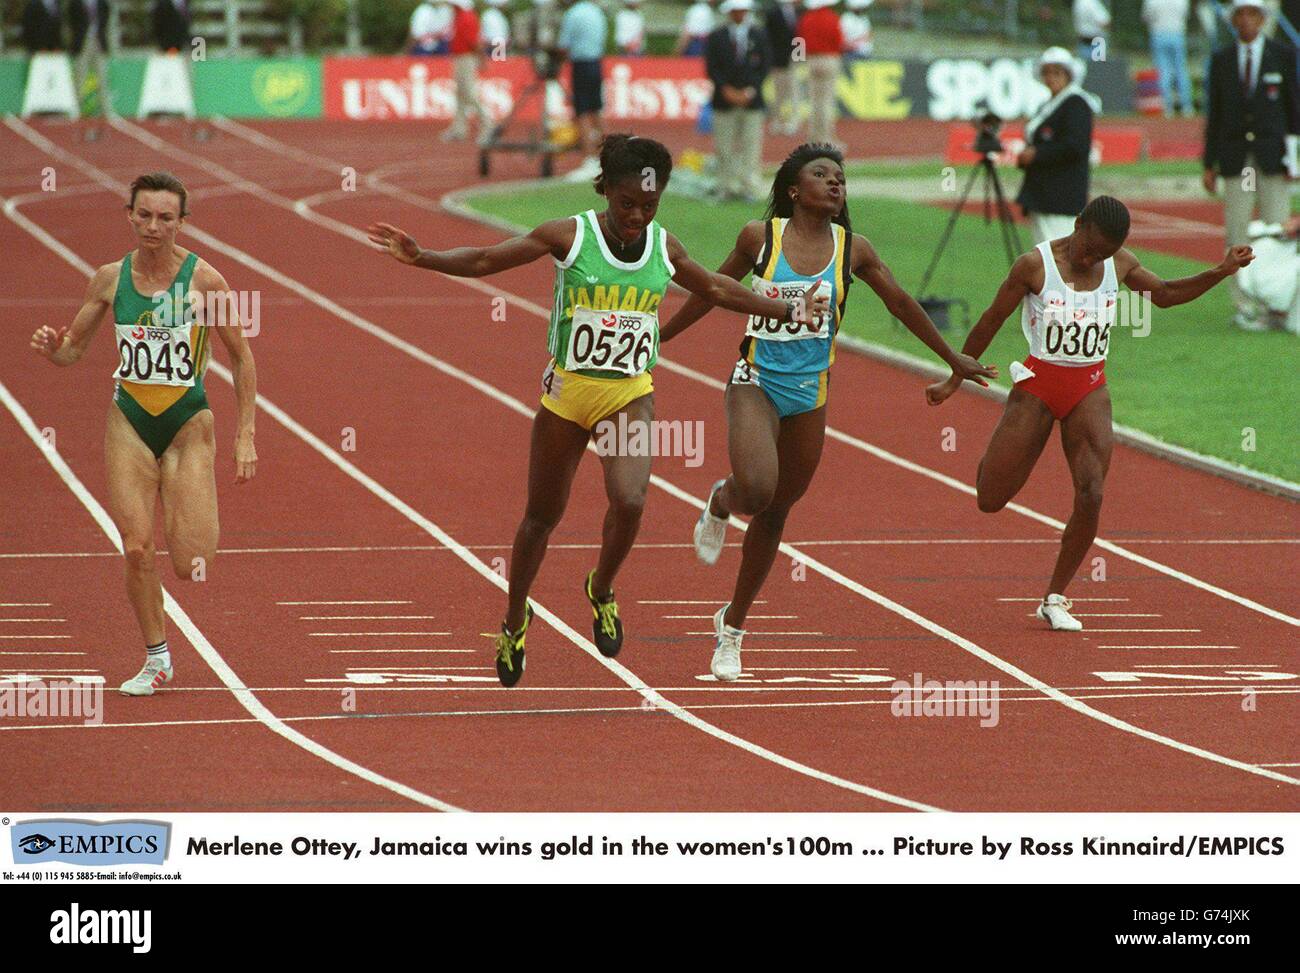 Commonwealth Games Auckland-Athletics. Merlene Ottey, Jamaica wins gold in the women's100m ... Picture by Ross Kinnaird/EMPICS Stock Photo